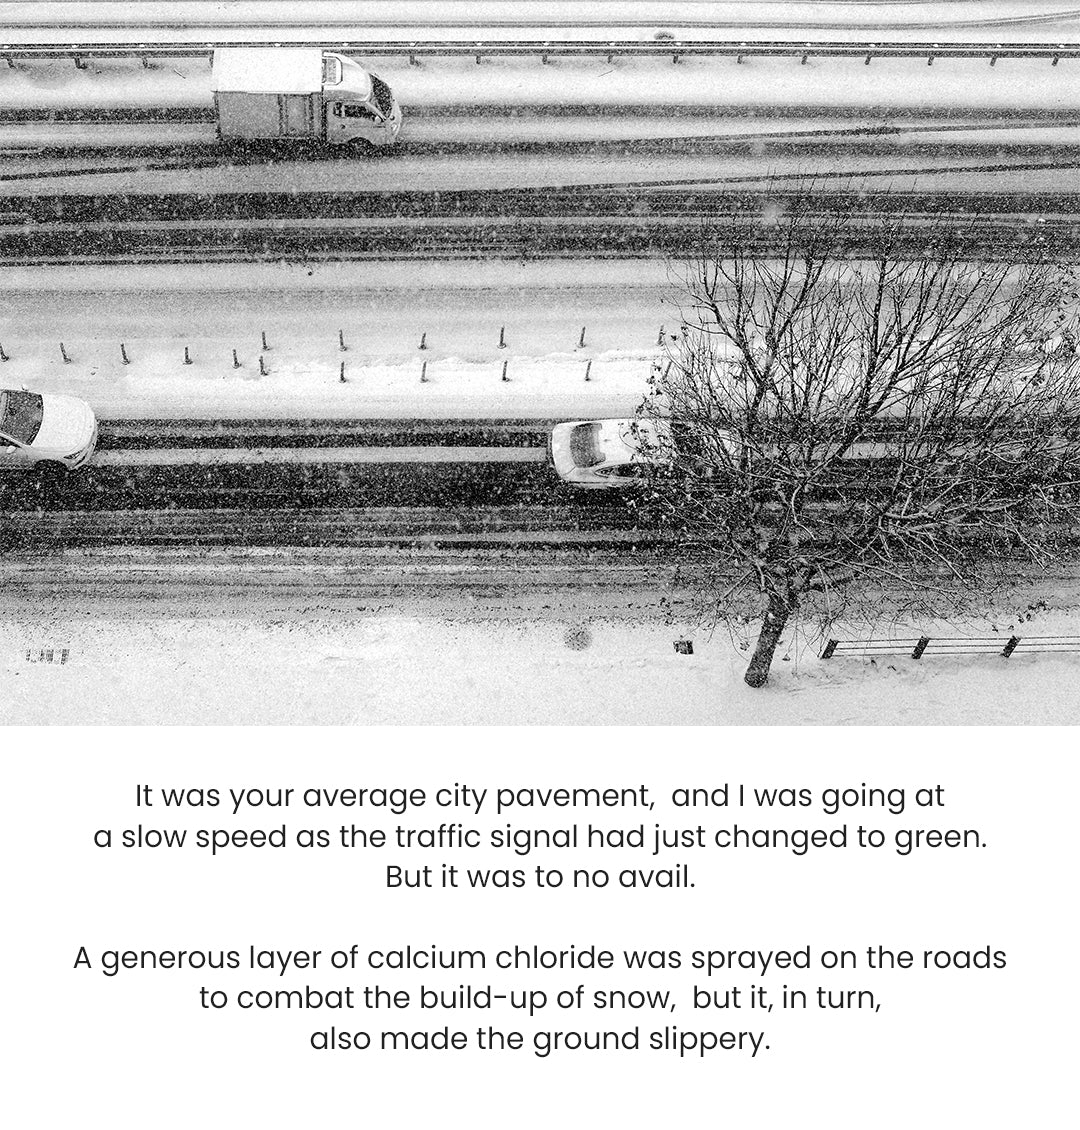 It was your average city pavement, and I was going at a slow speed as the traffic signal had just changed to green. But it was to no avail. A generous layer of calcium chloride was sprayed on the roads to combat the build-up of snow, but it, in turn, also made the ground slippery.